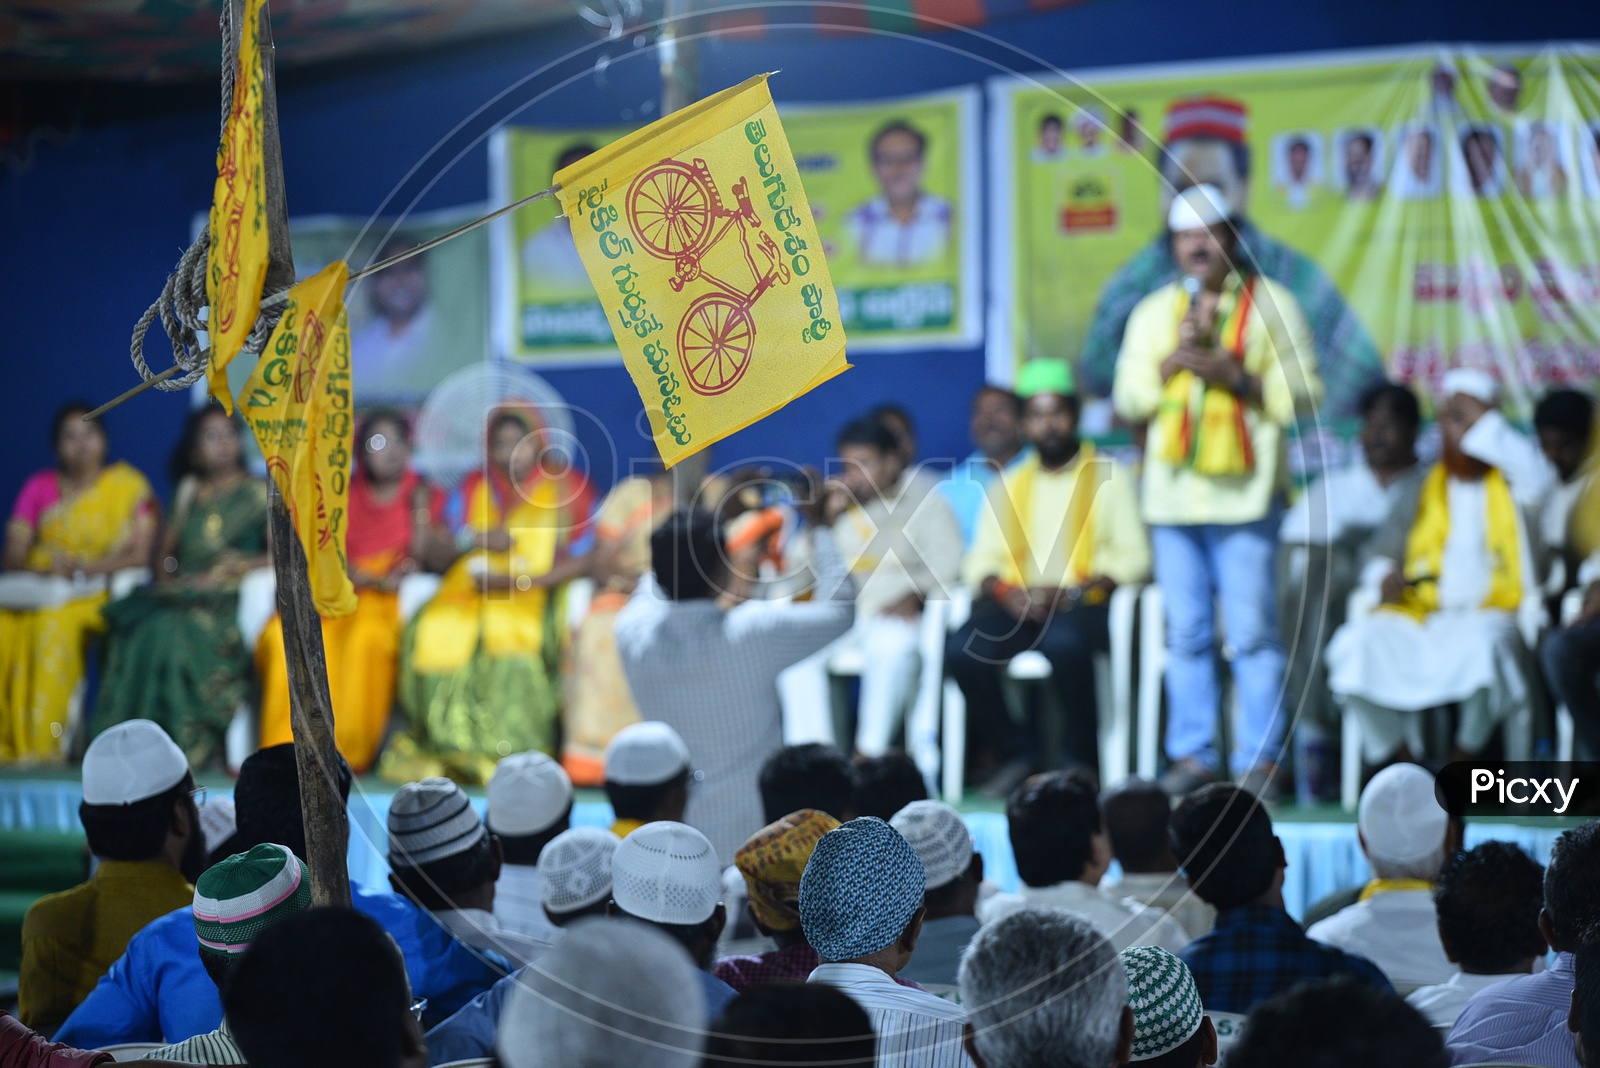 TDP Flags During Election Campaign Rally